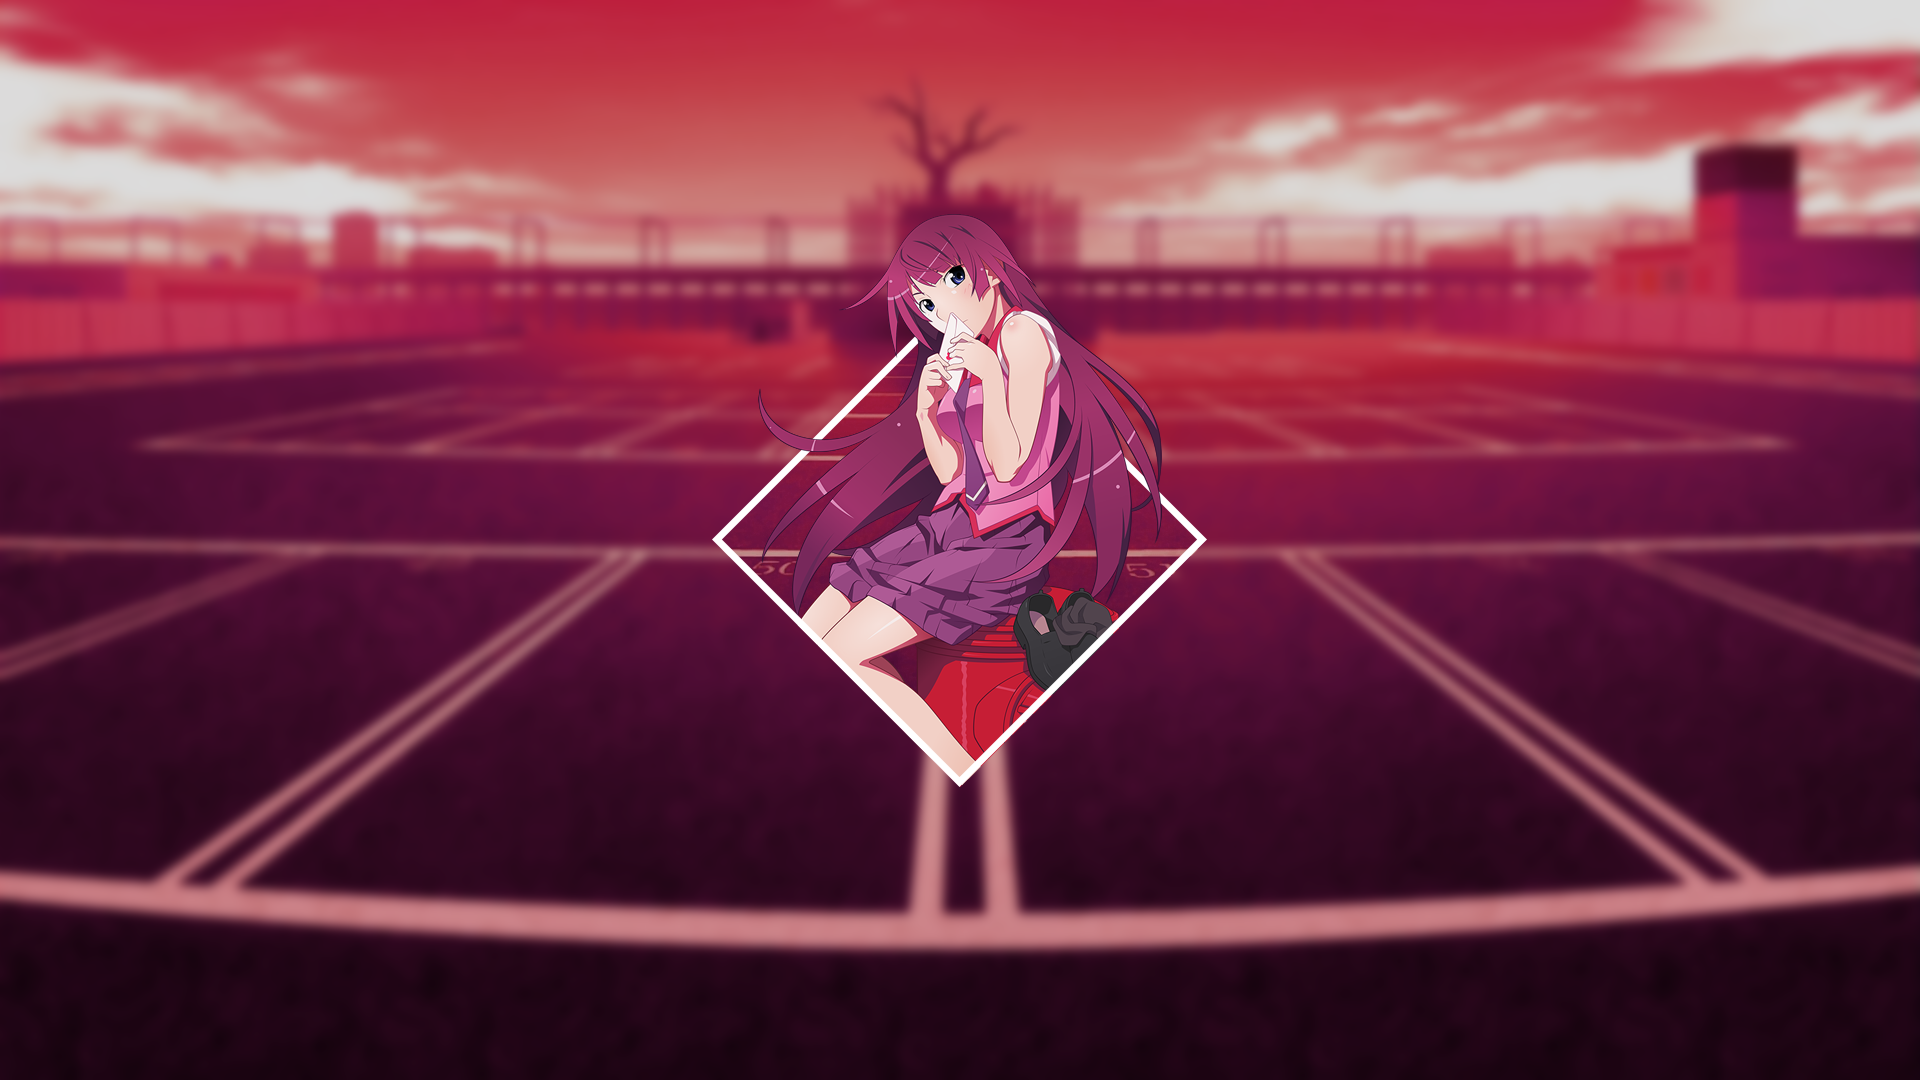 Monogatari (Series) HD Wallpapers and Backgrounds. 